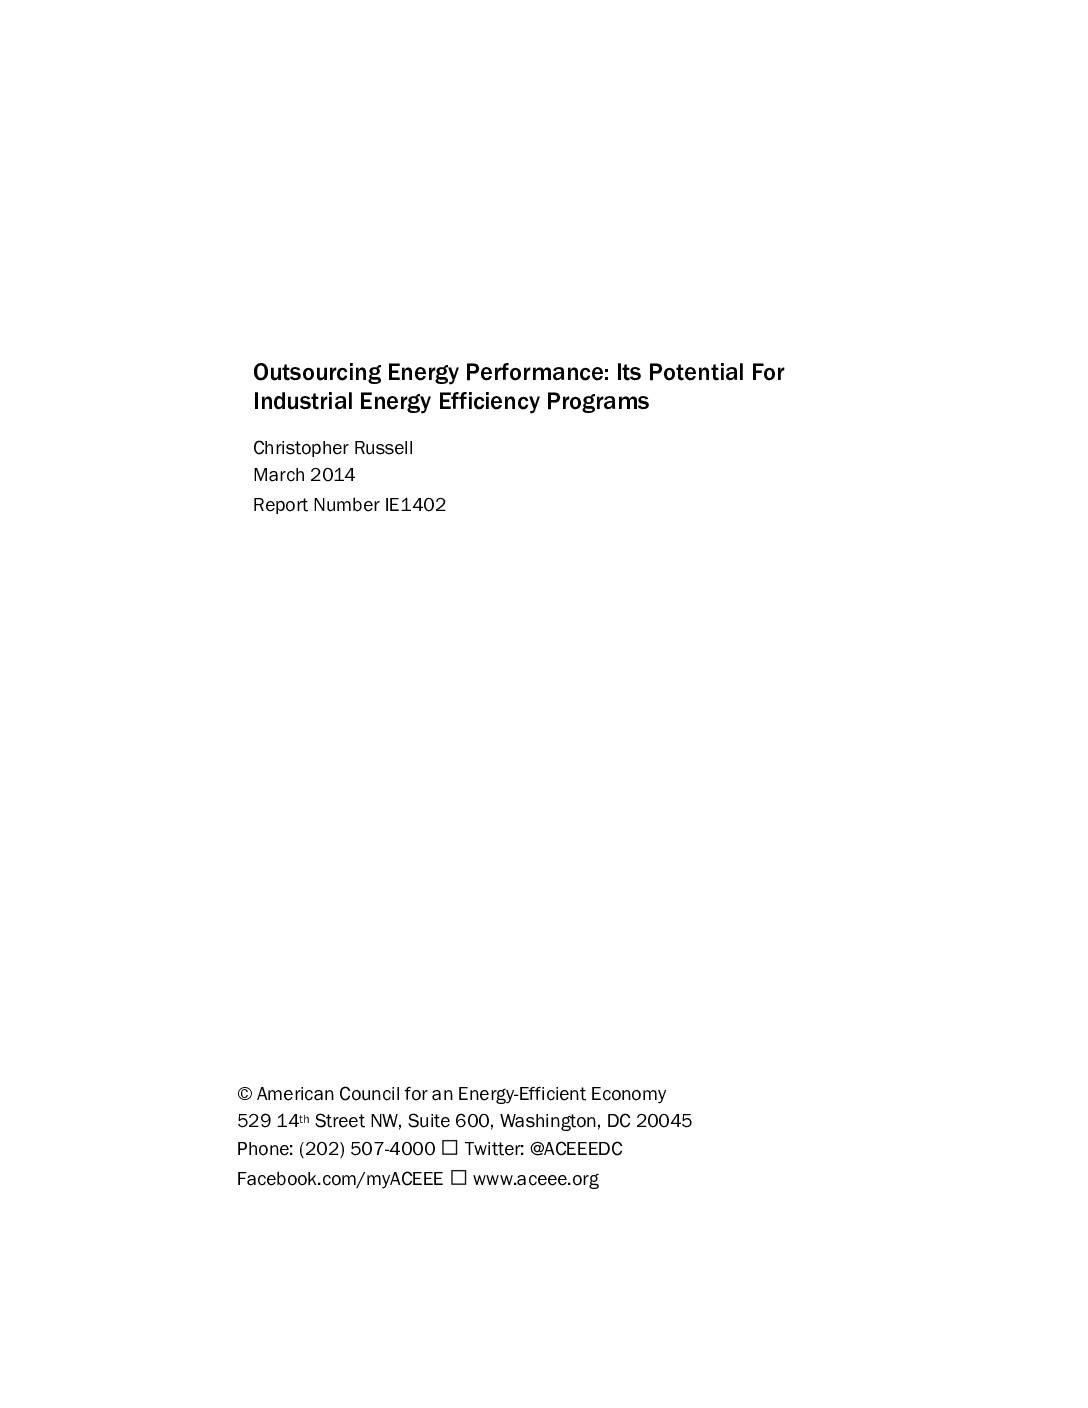 Outsourcing Energy Performance: Its Potential for Industrial Energy Efficiency Programs